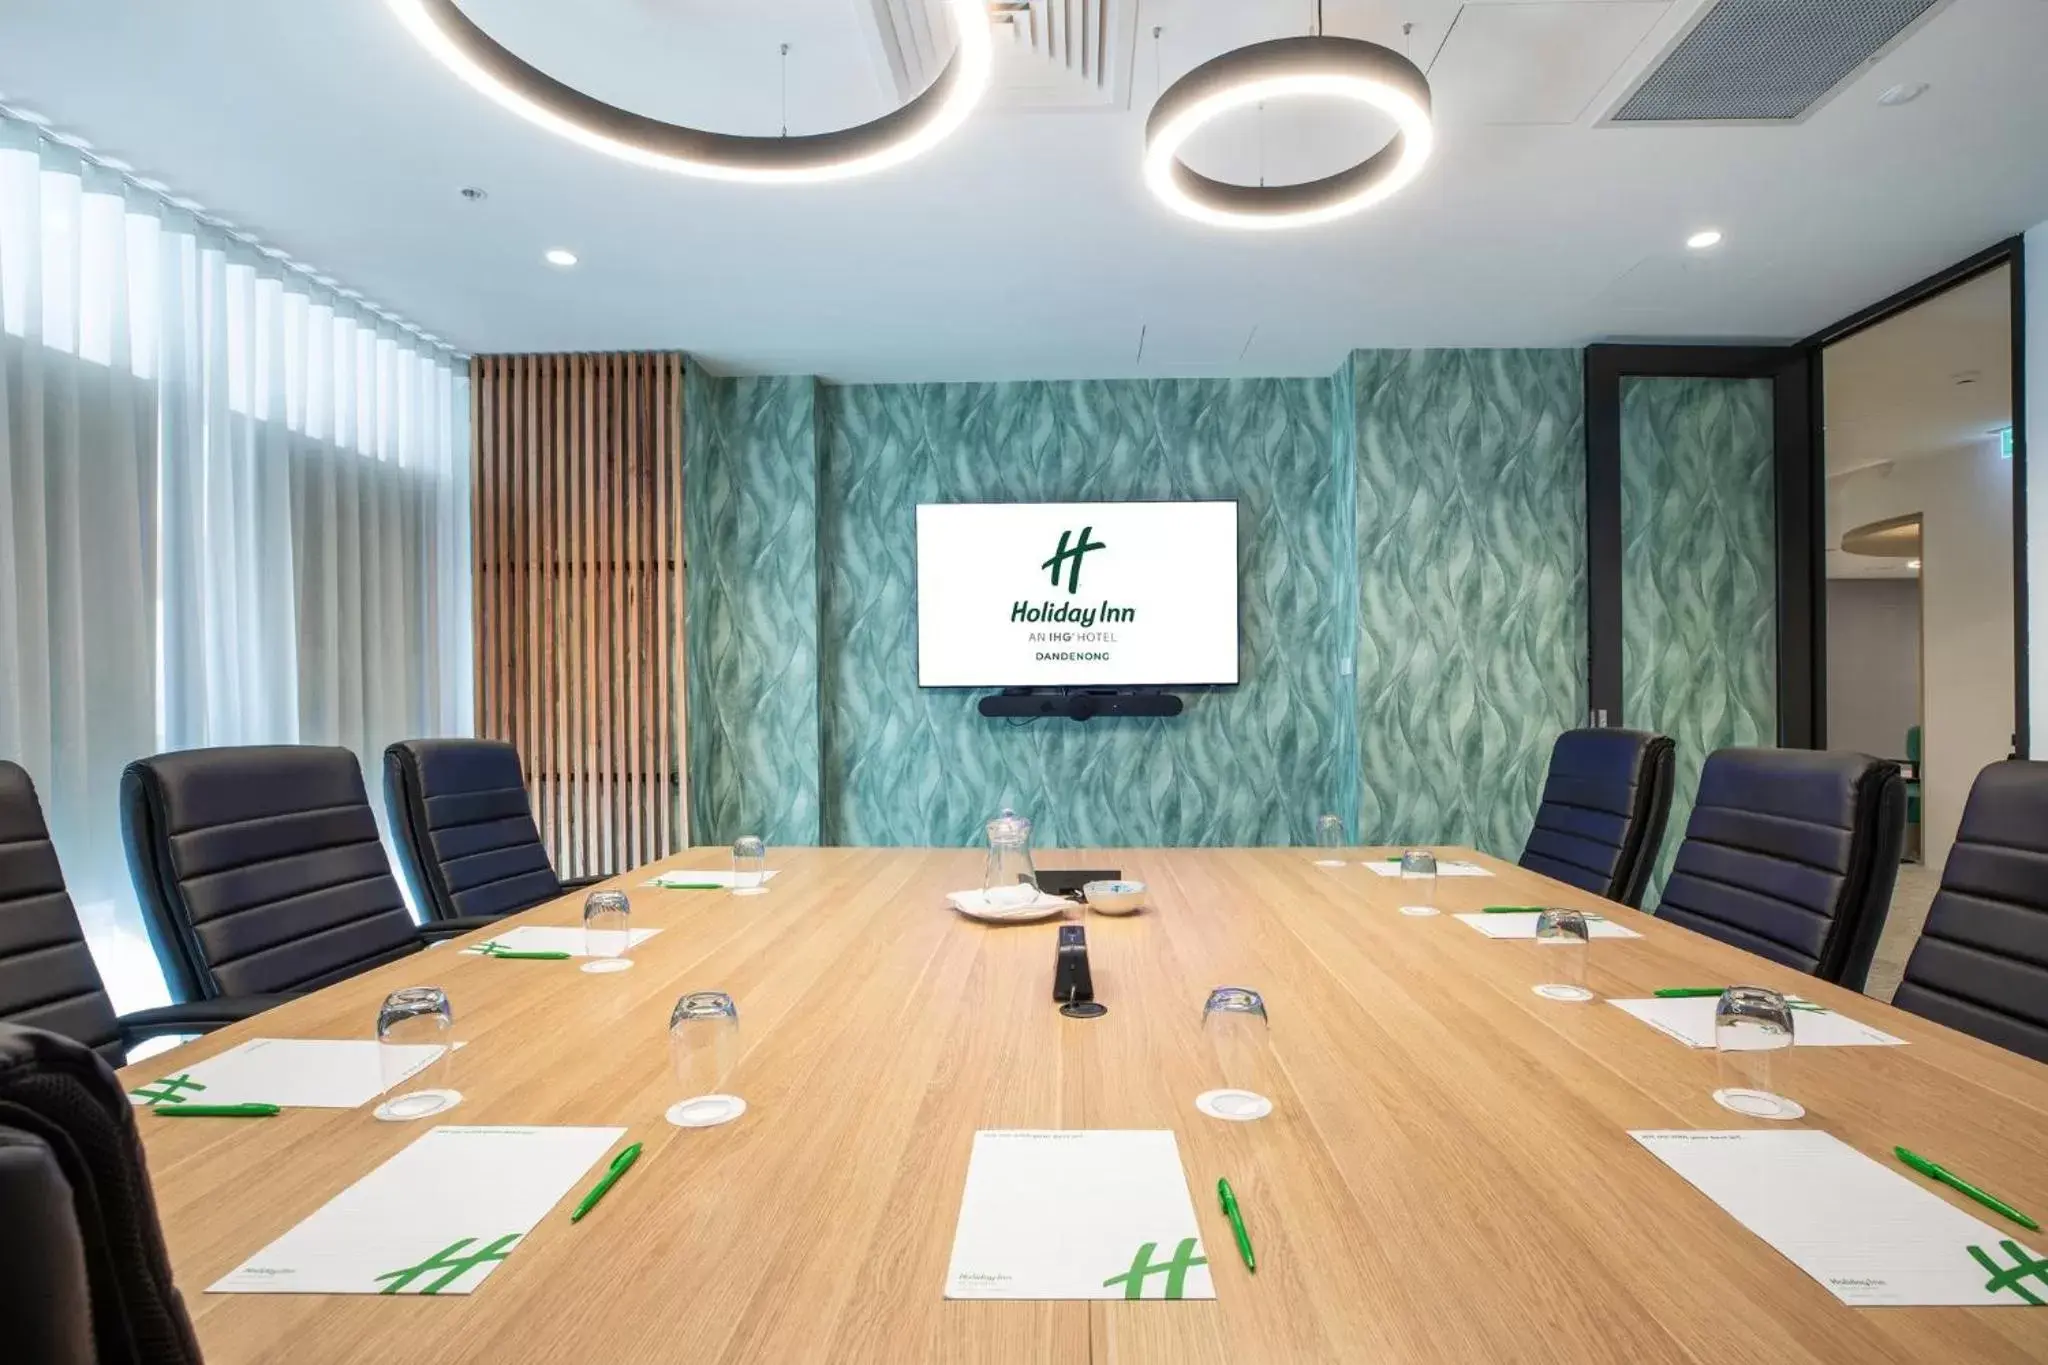 Meeting/conference room, Business Area/Conference Room in Holiday Inn Dandenong, an IHG Hotel